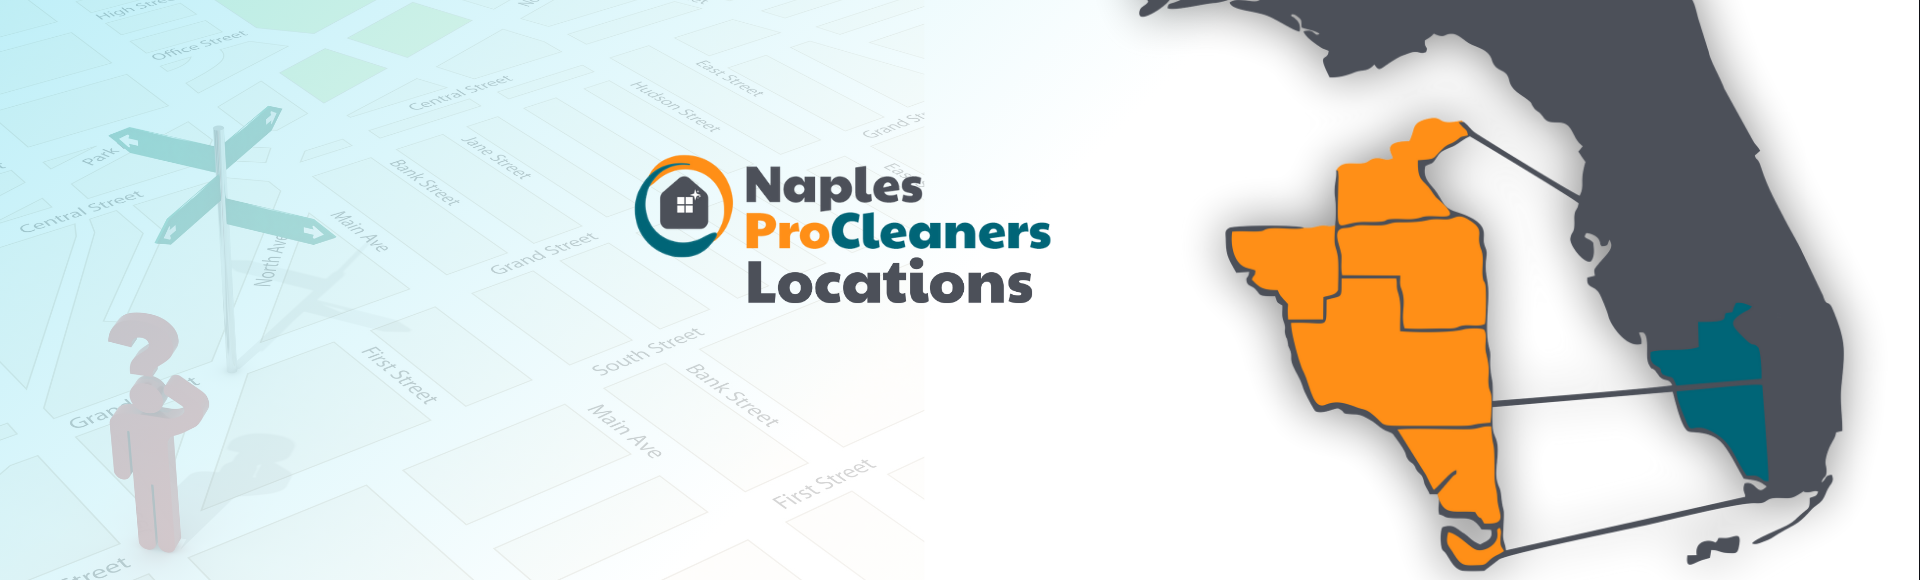 Naples ProCleaners Locations